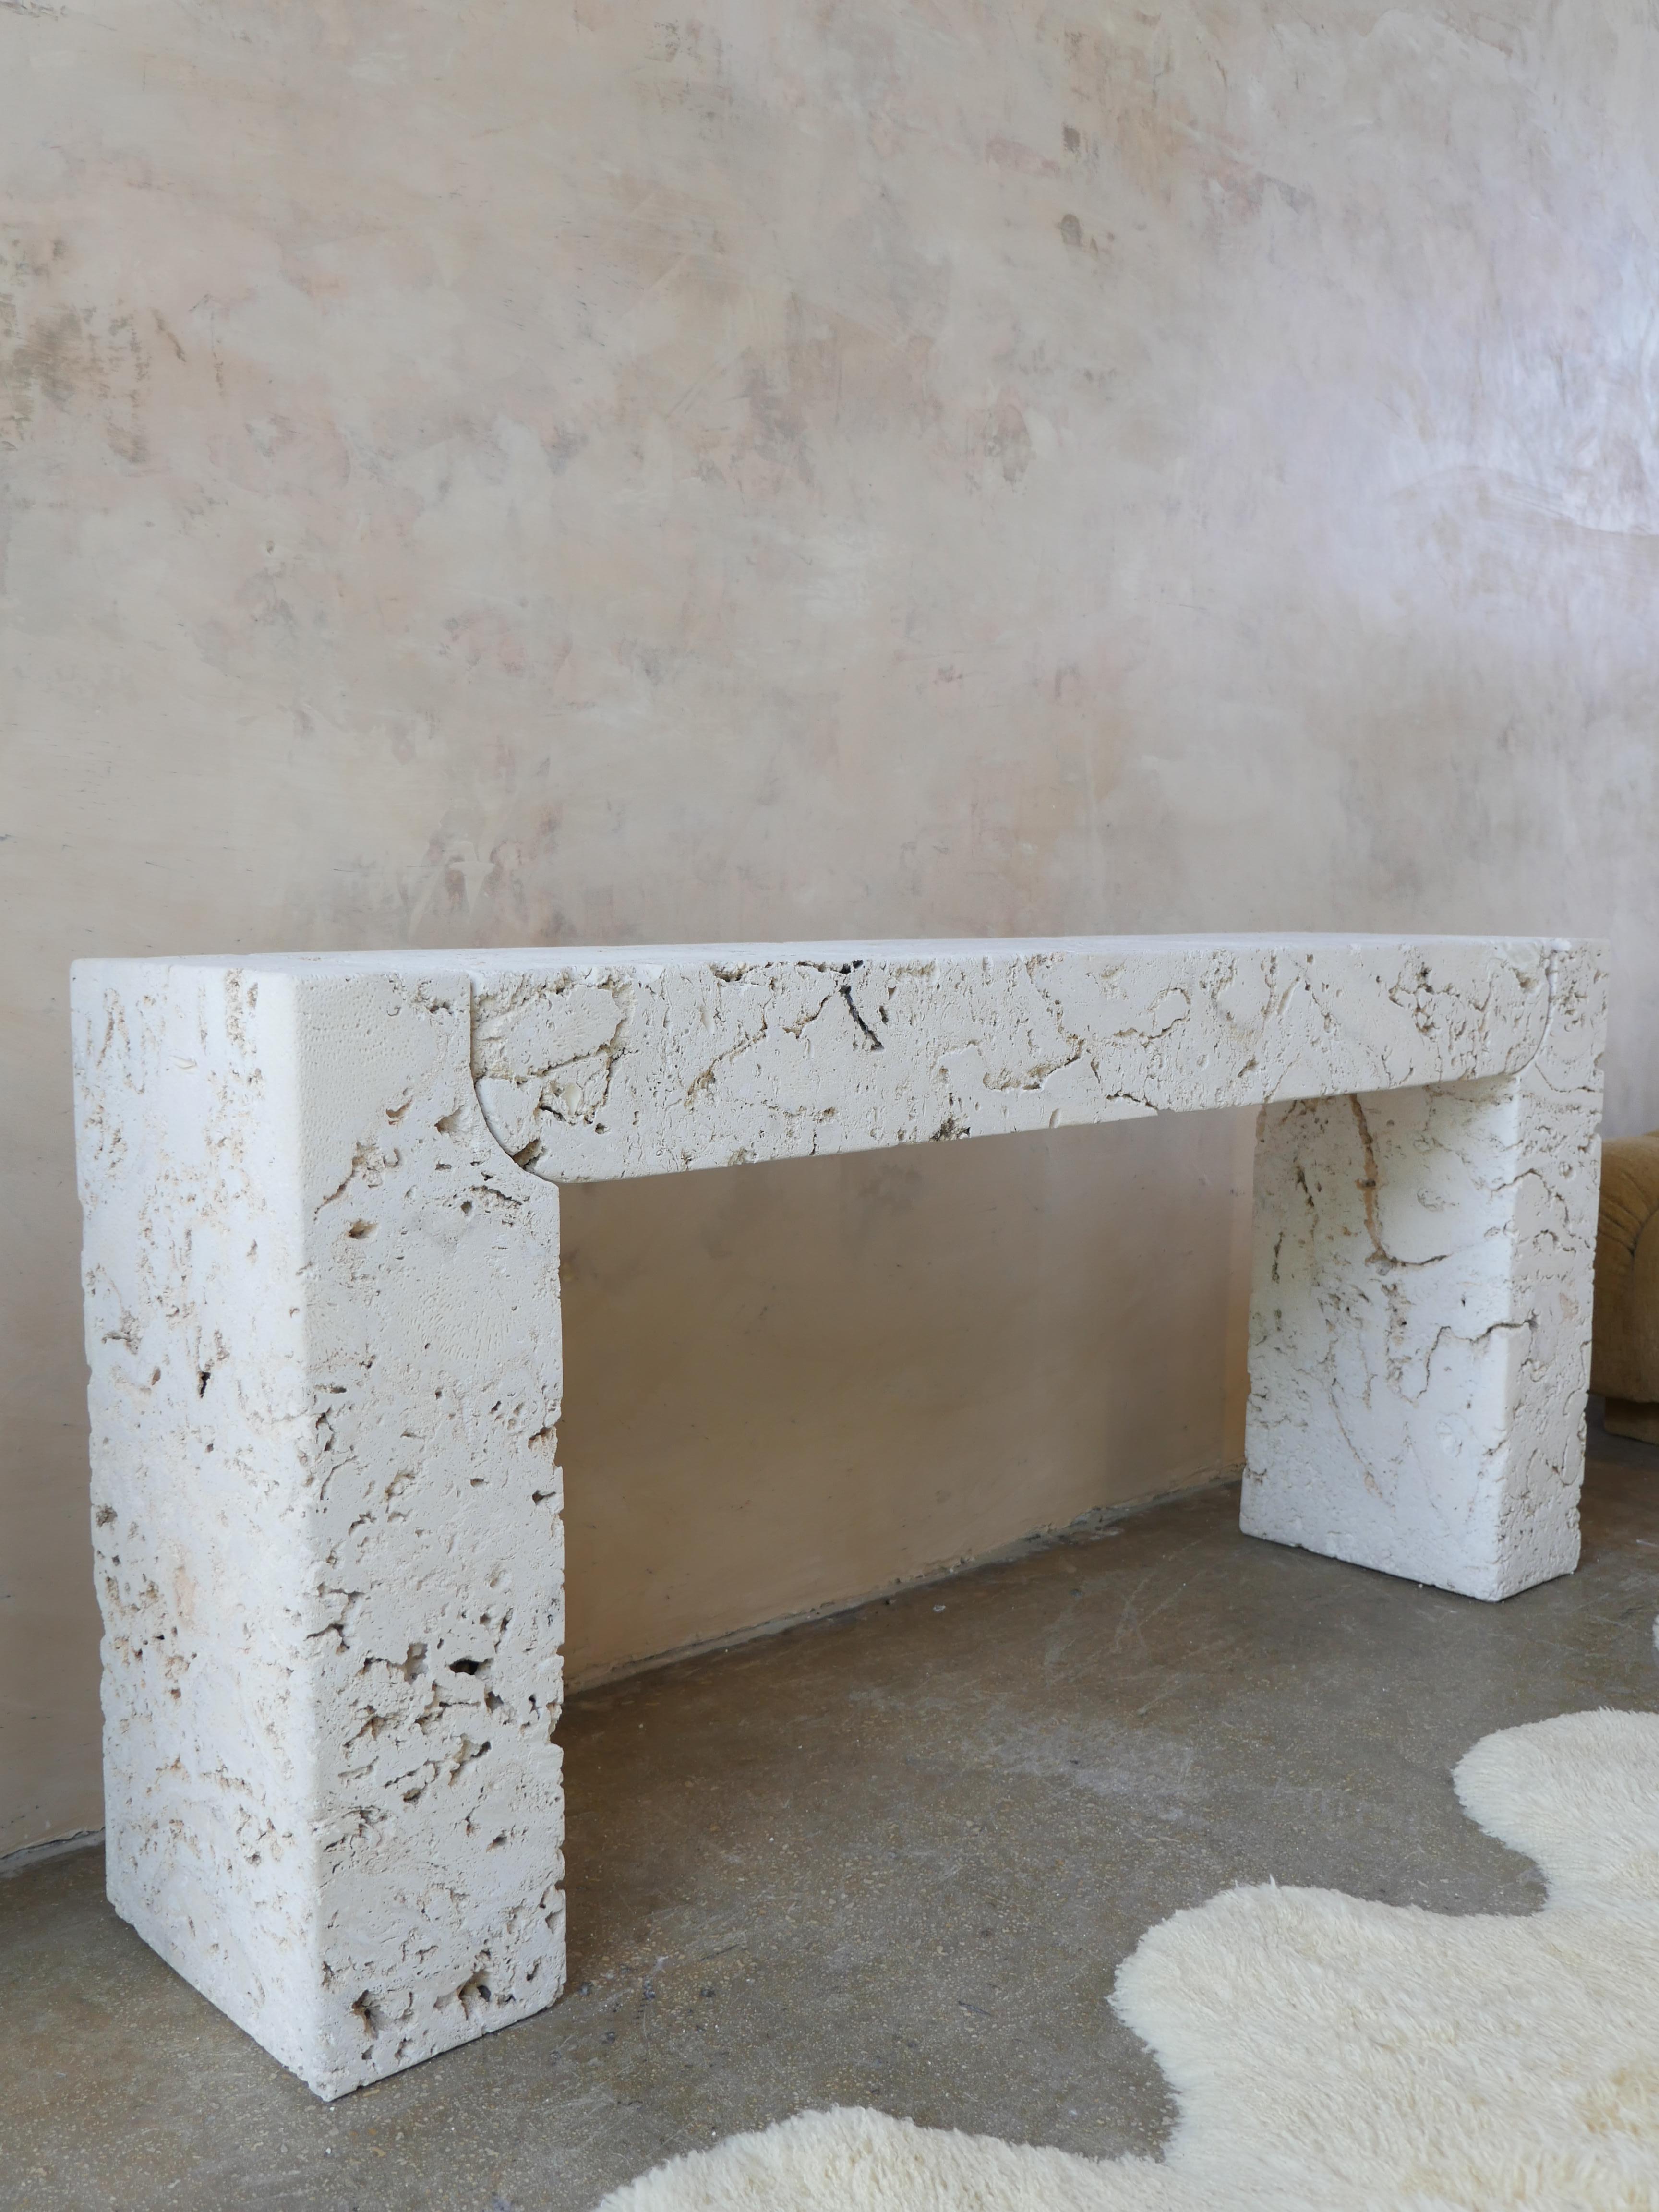 Monumental 1980's three-piece, post modern coral stone console table. With its unique shape and textured calcified organisms, this beautiful coral console is sure to make a statement in any room it's placed. The table is comprised of two bases, and